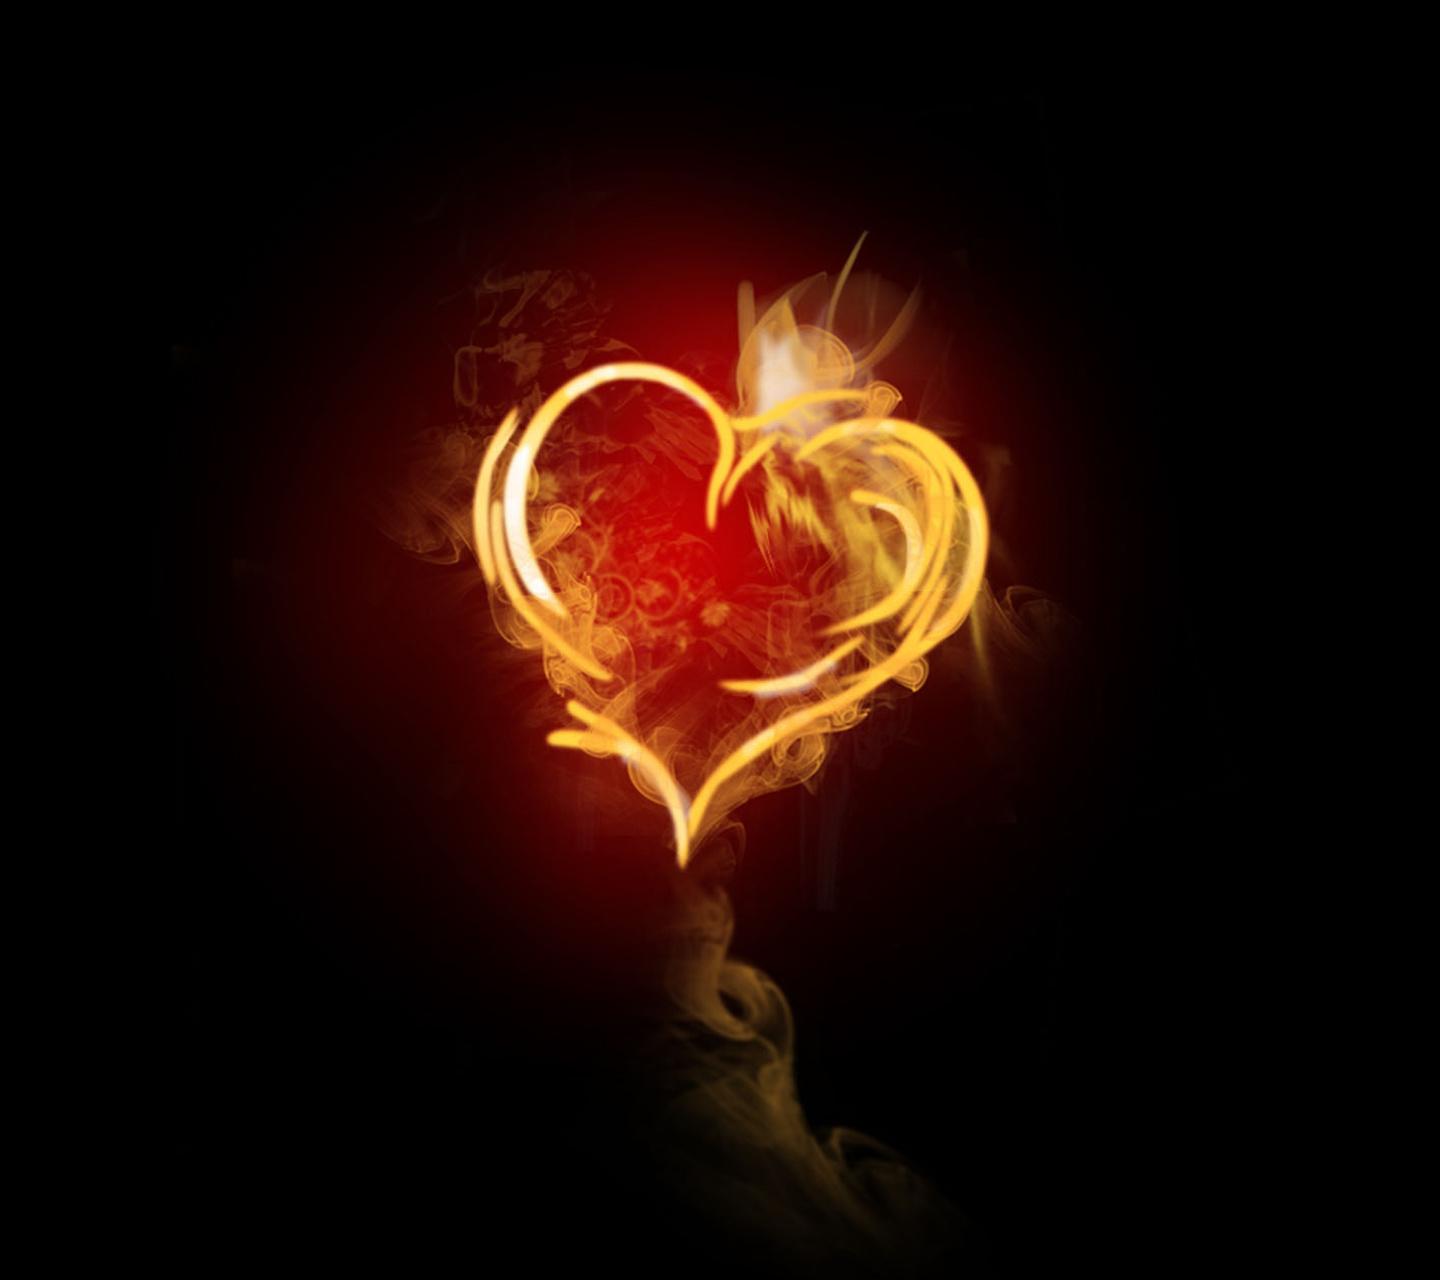 Download Burning heart hd wallpaper - Heart and rose hd wallpaper for your  mobile cell phone